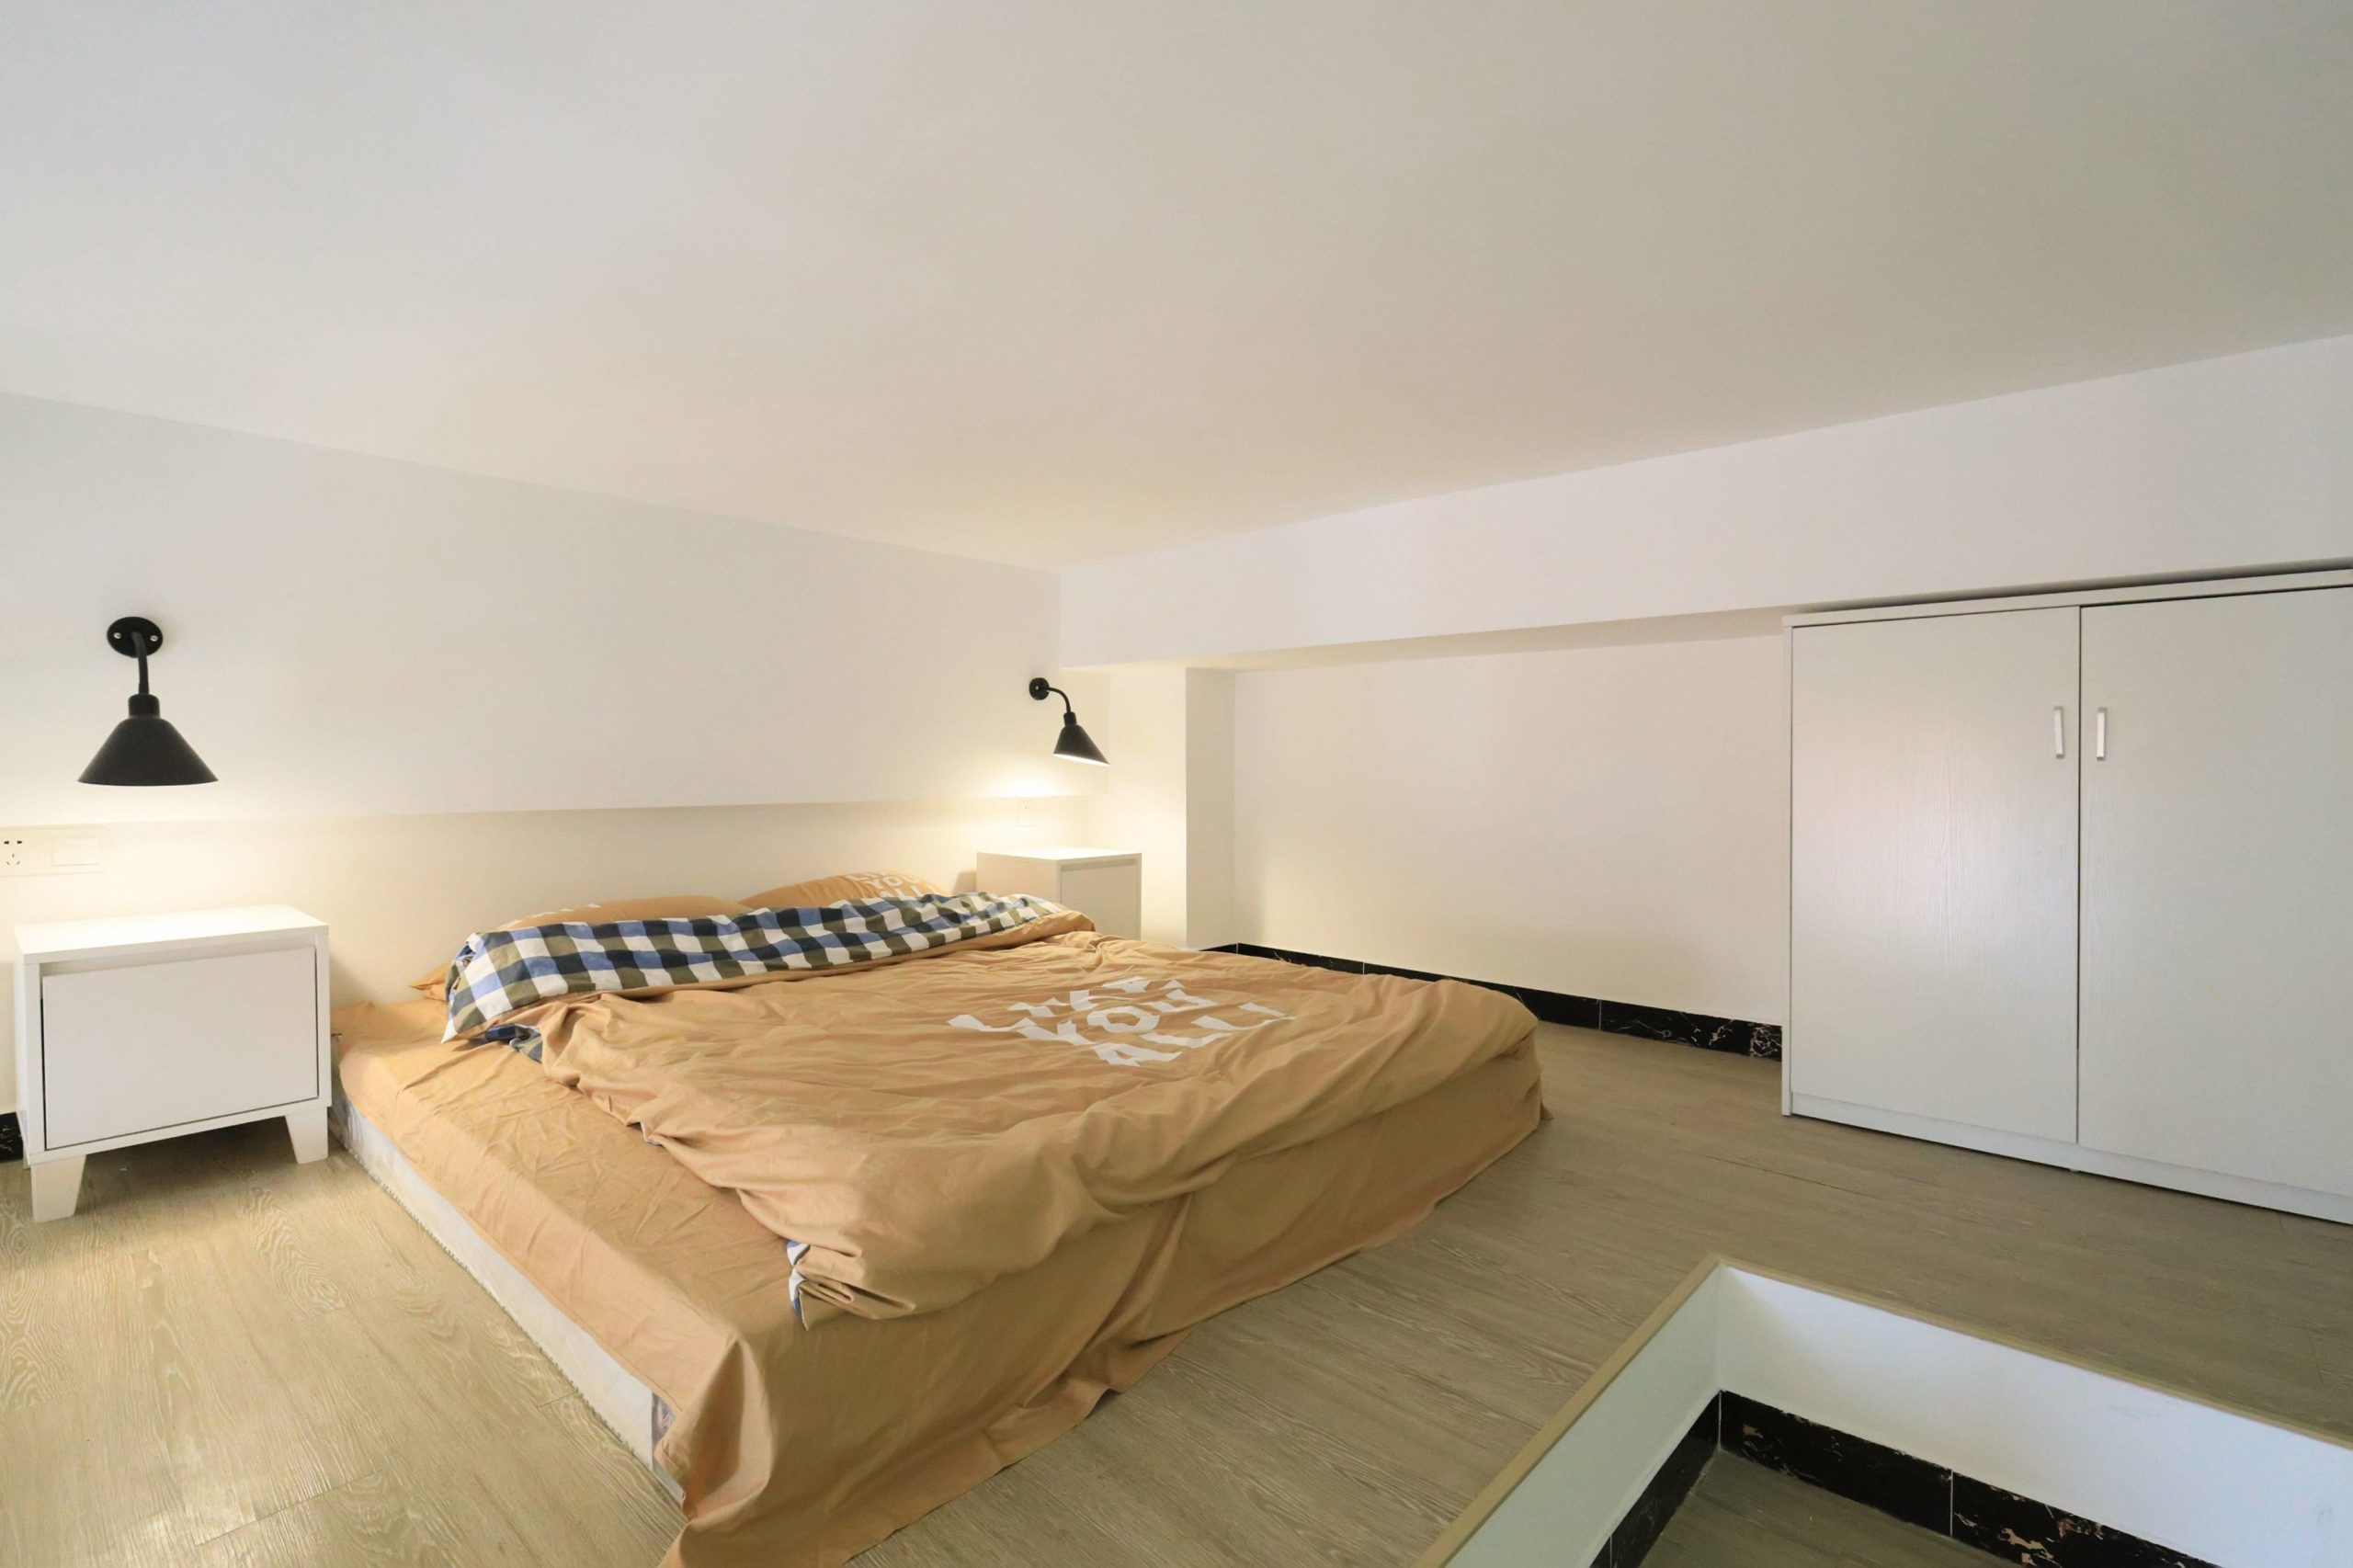 Featured image for “Longhua nice loft for rent”